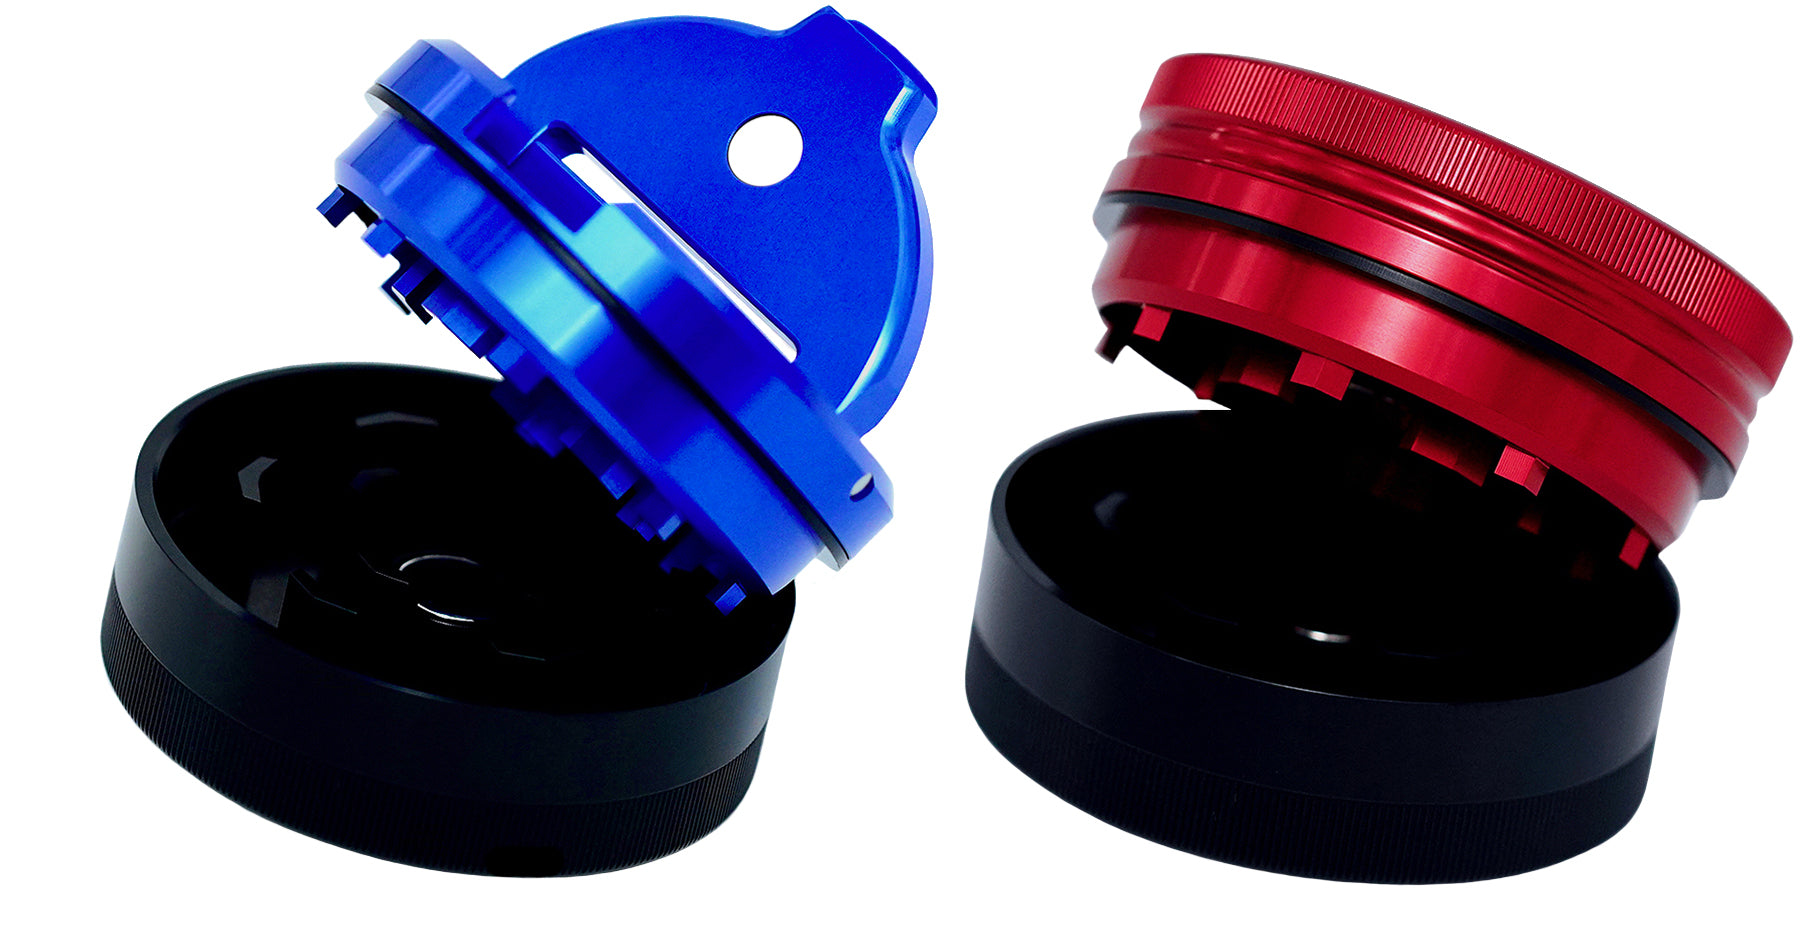 klleen kit grinders all-in-one herb shredder black blue green red yellow high quality aluminum best 2 pieces